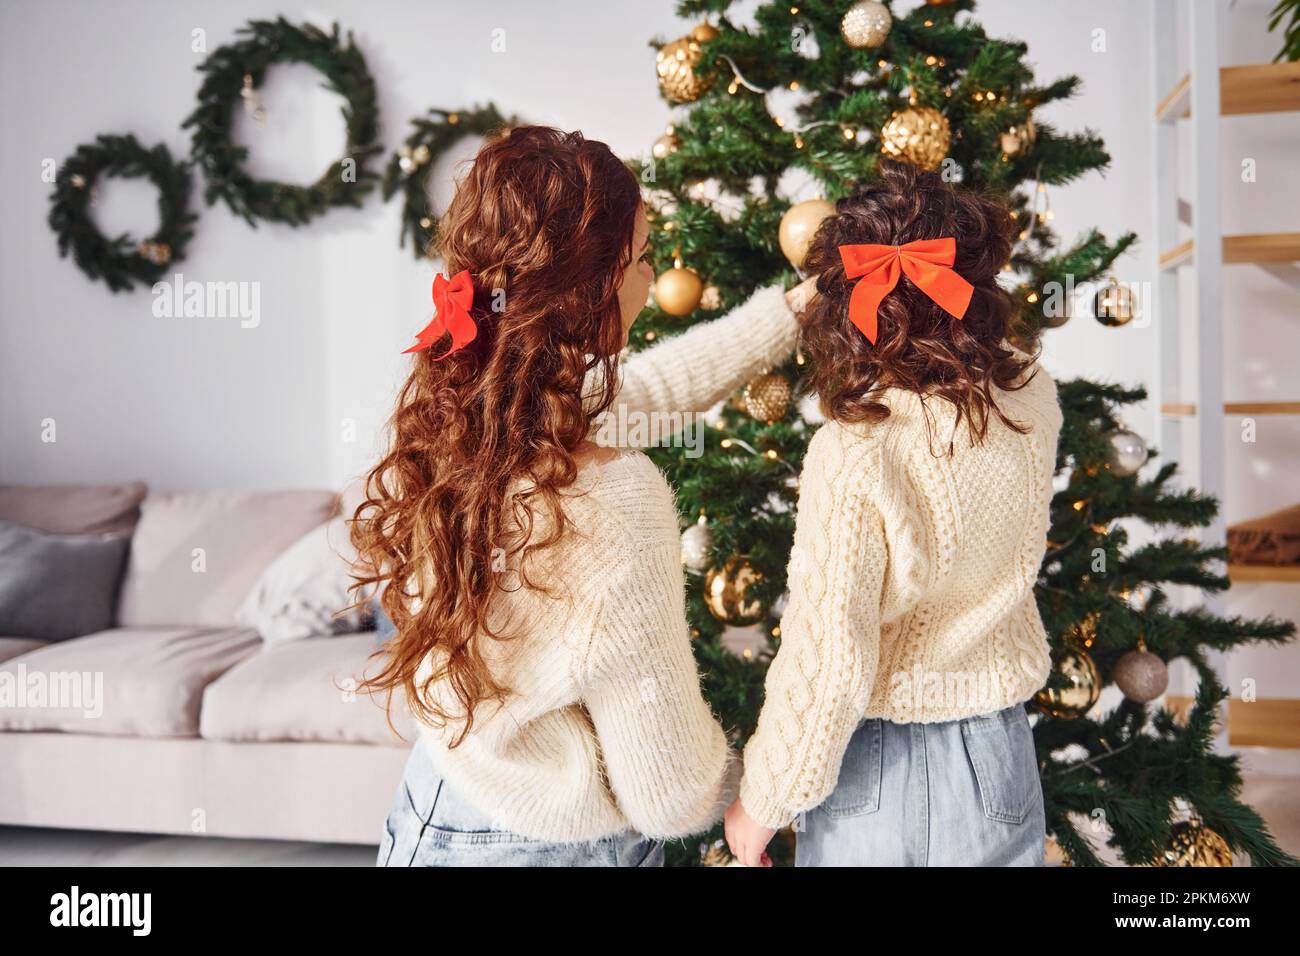 Decorating tree. Mother with her little daughter is at home. Stock Photo